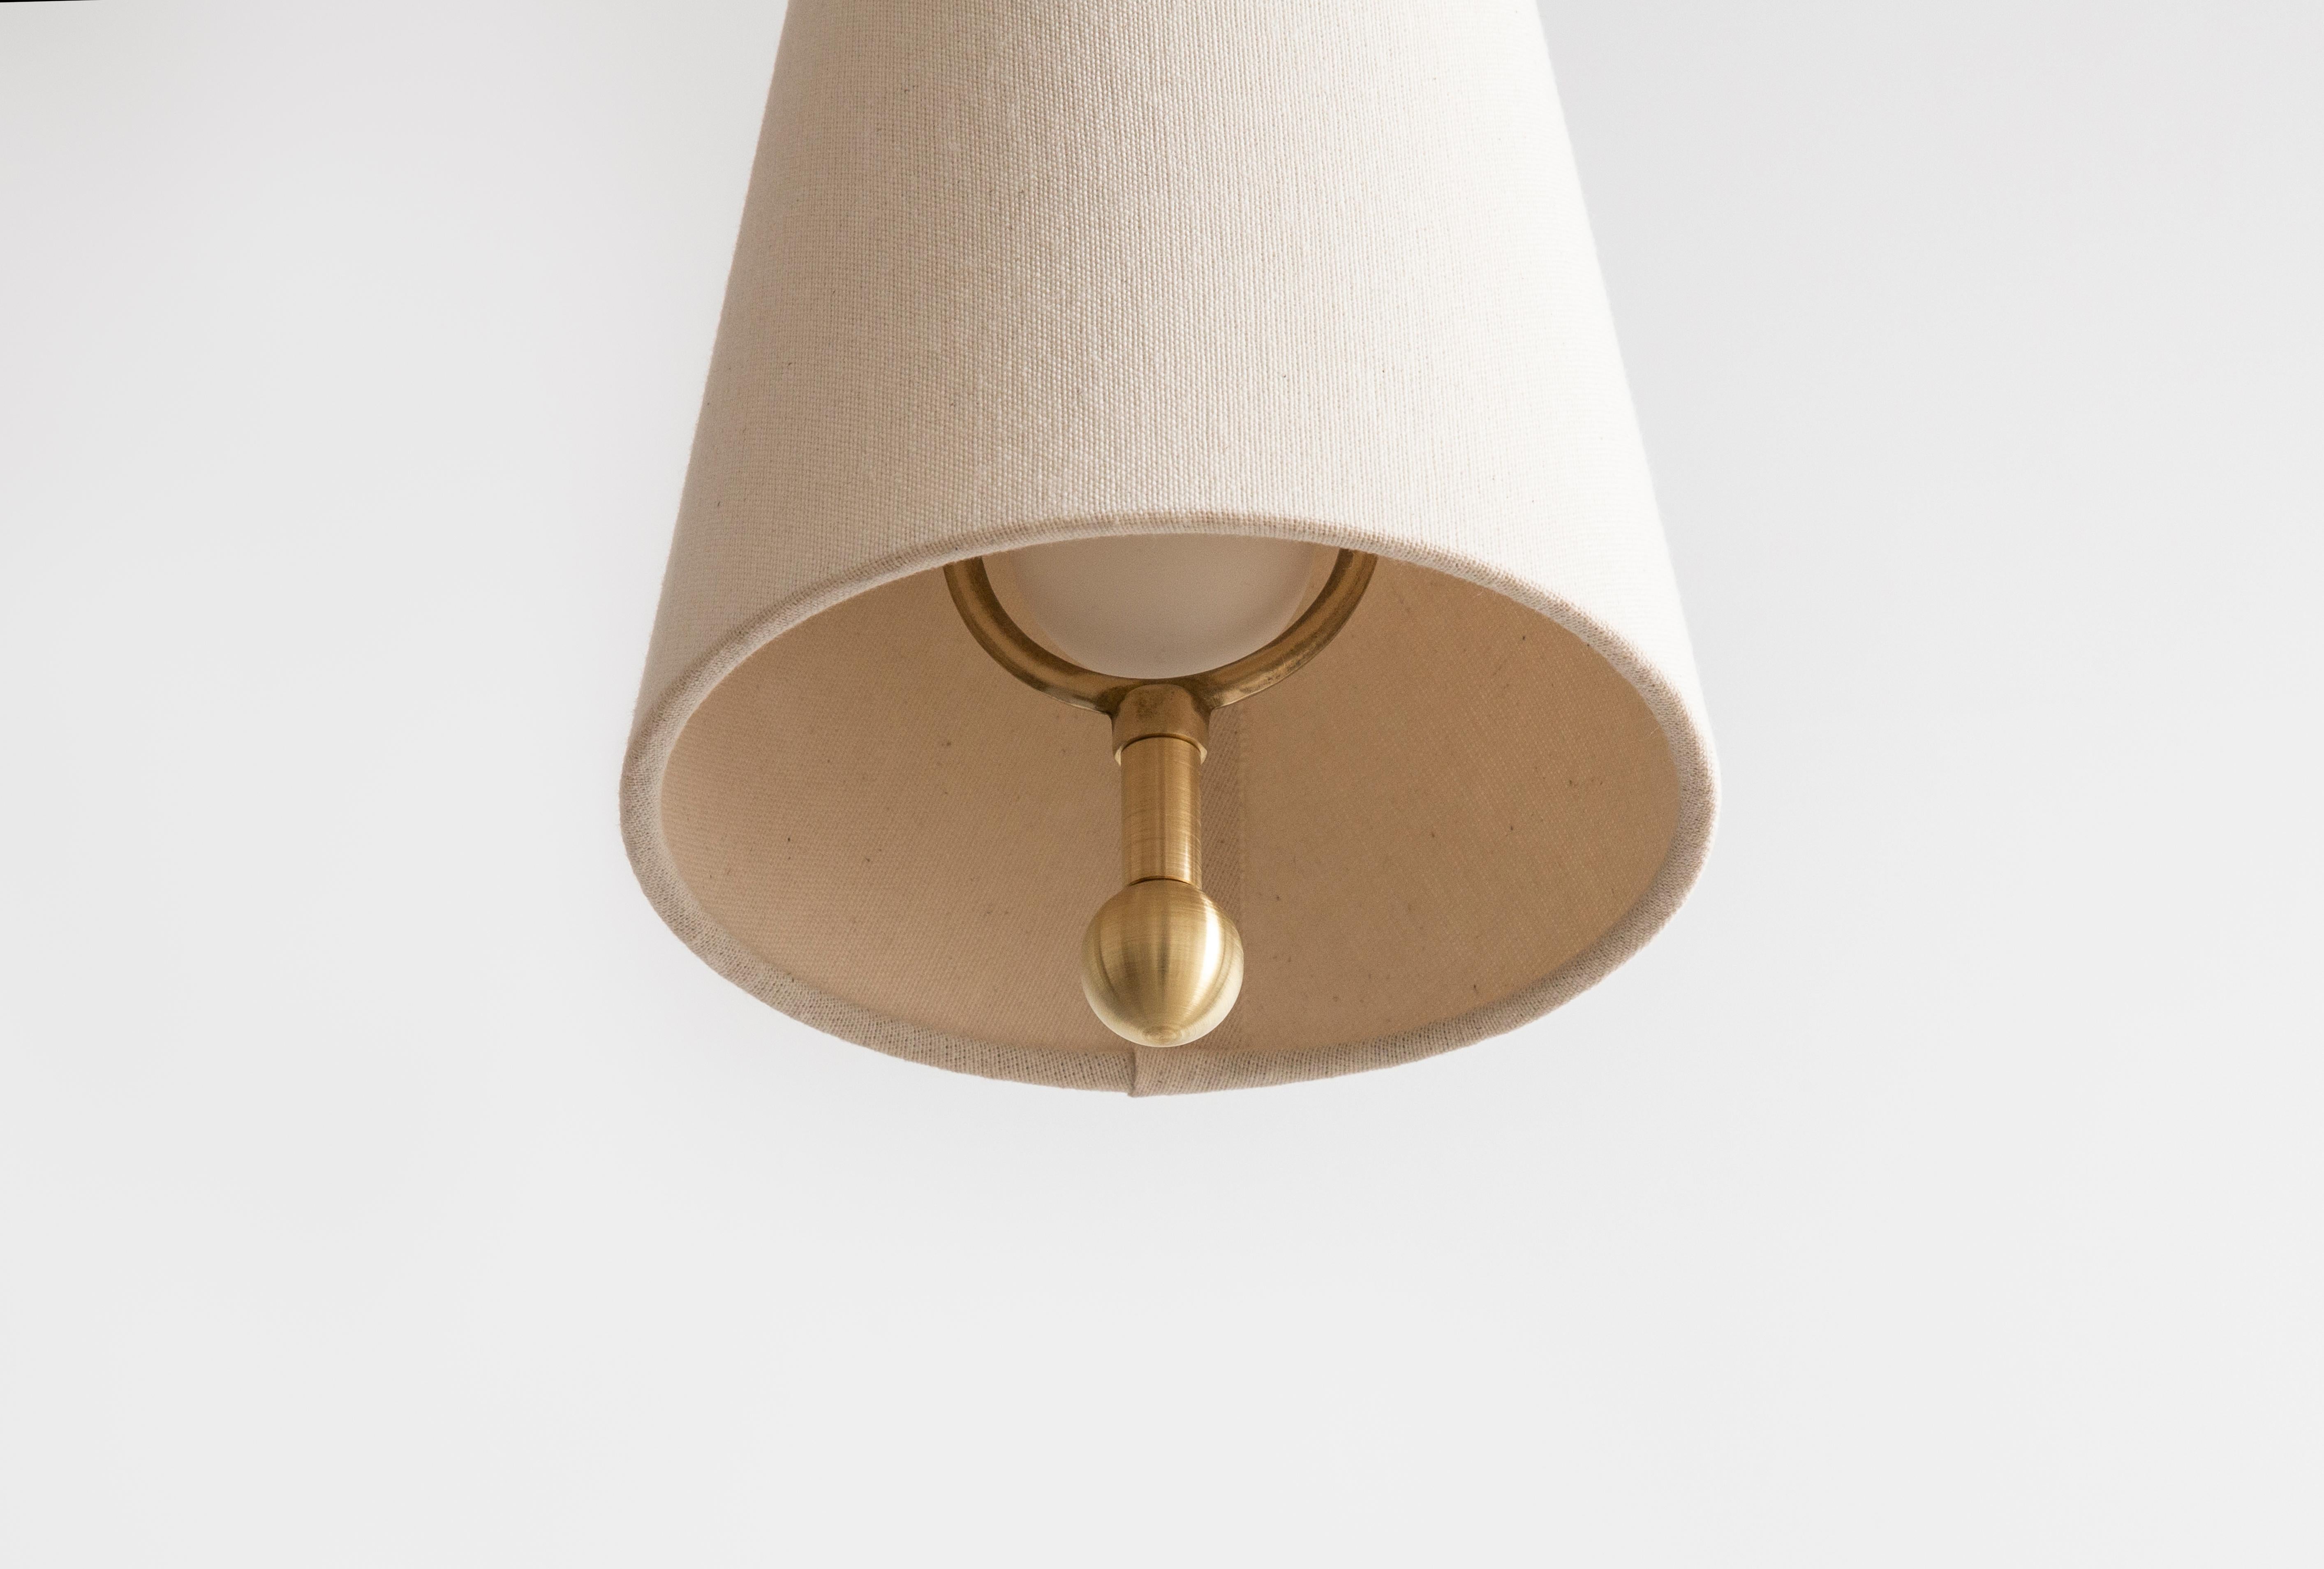 The house cord pendant small is a diminutive take on a Classic shaded pendant form. Perfectly scaled to make a subtle yet impactful statement, the pendant combines a modern drop-cord function with this iconic traditional form. Incorporating a